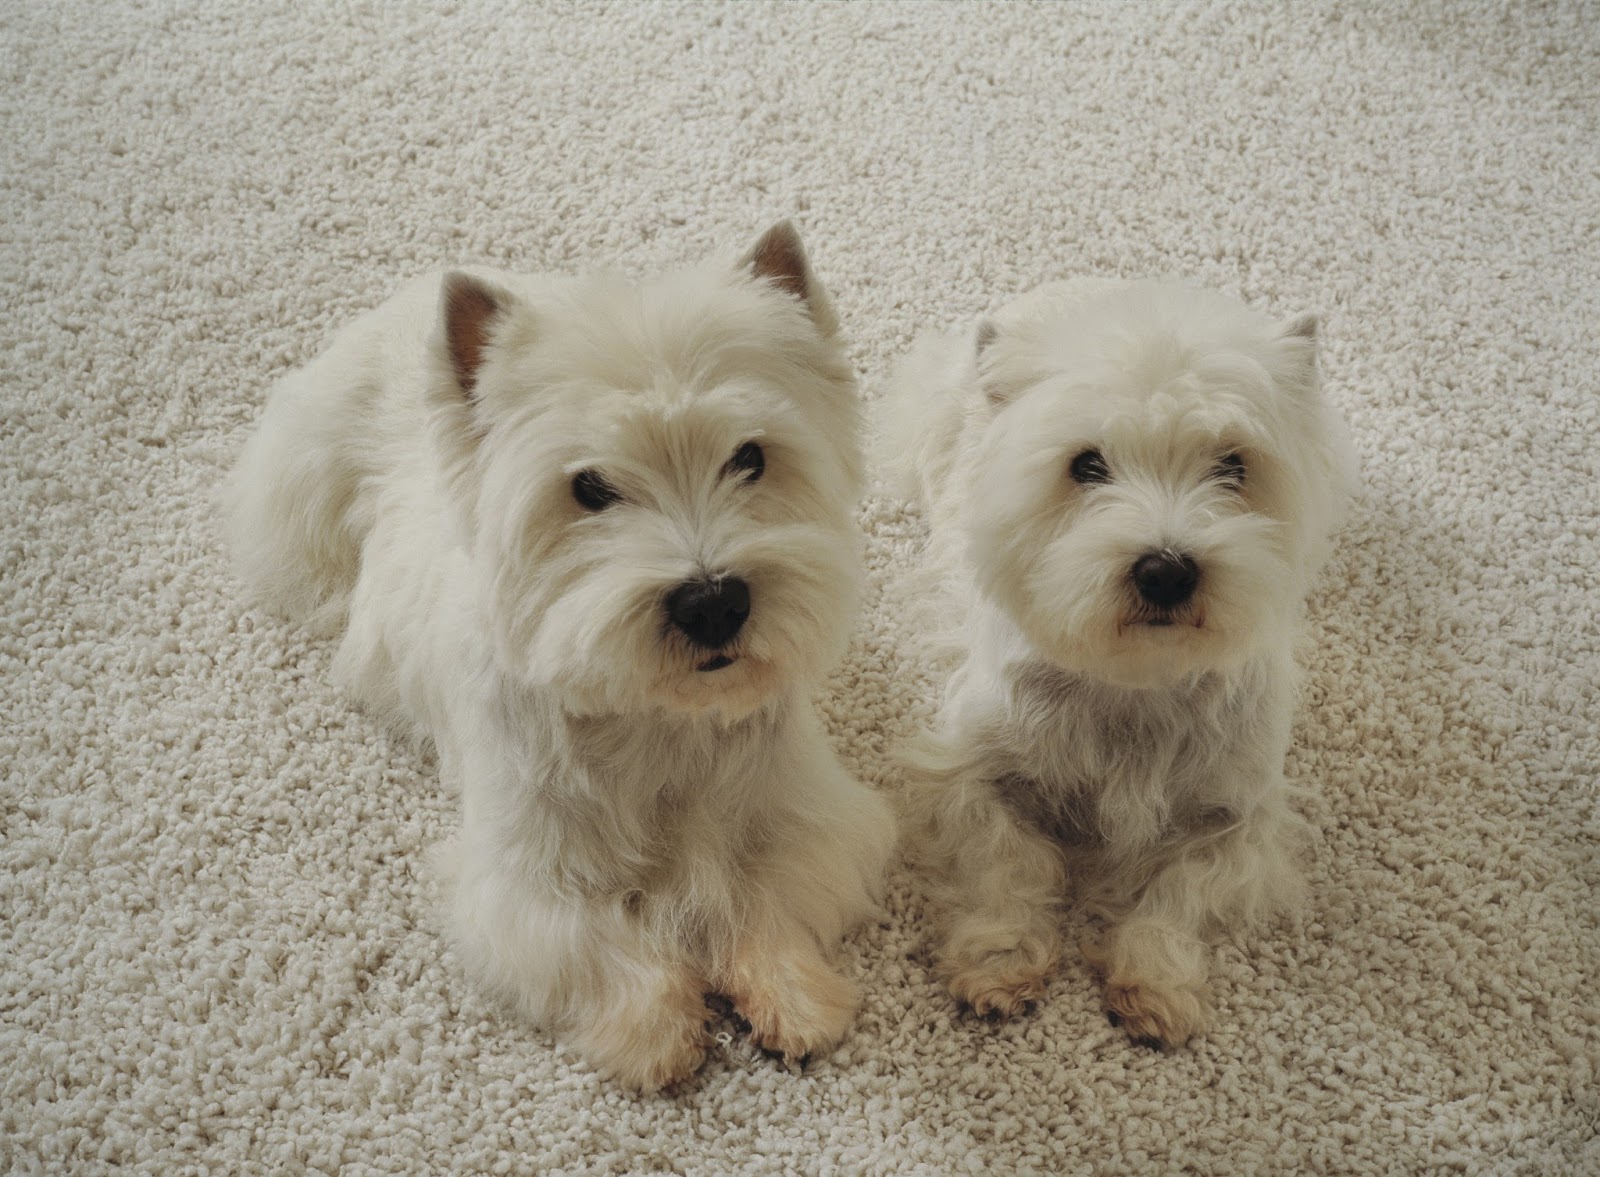 Indianapolis' store for pet-friendly carpet | Indianapolis ...